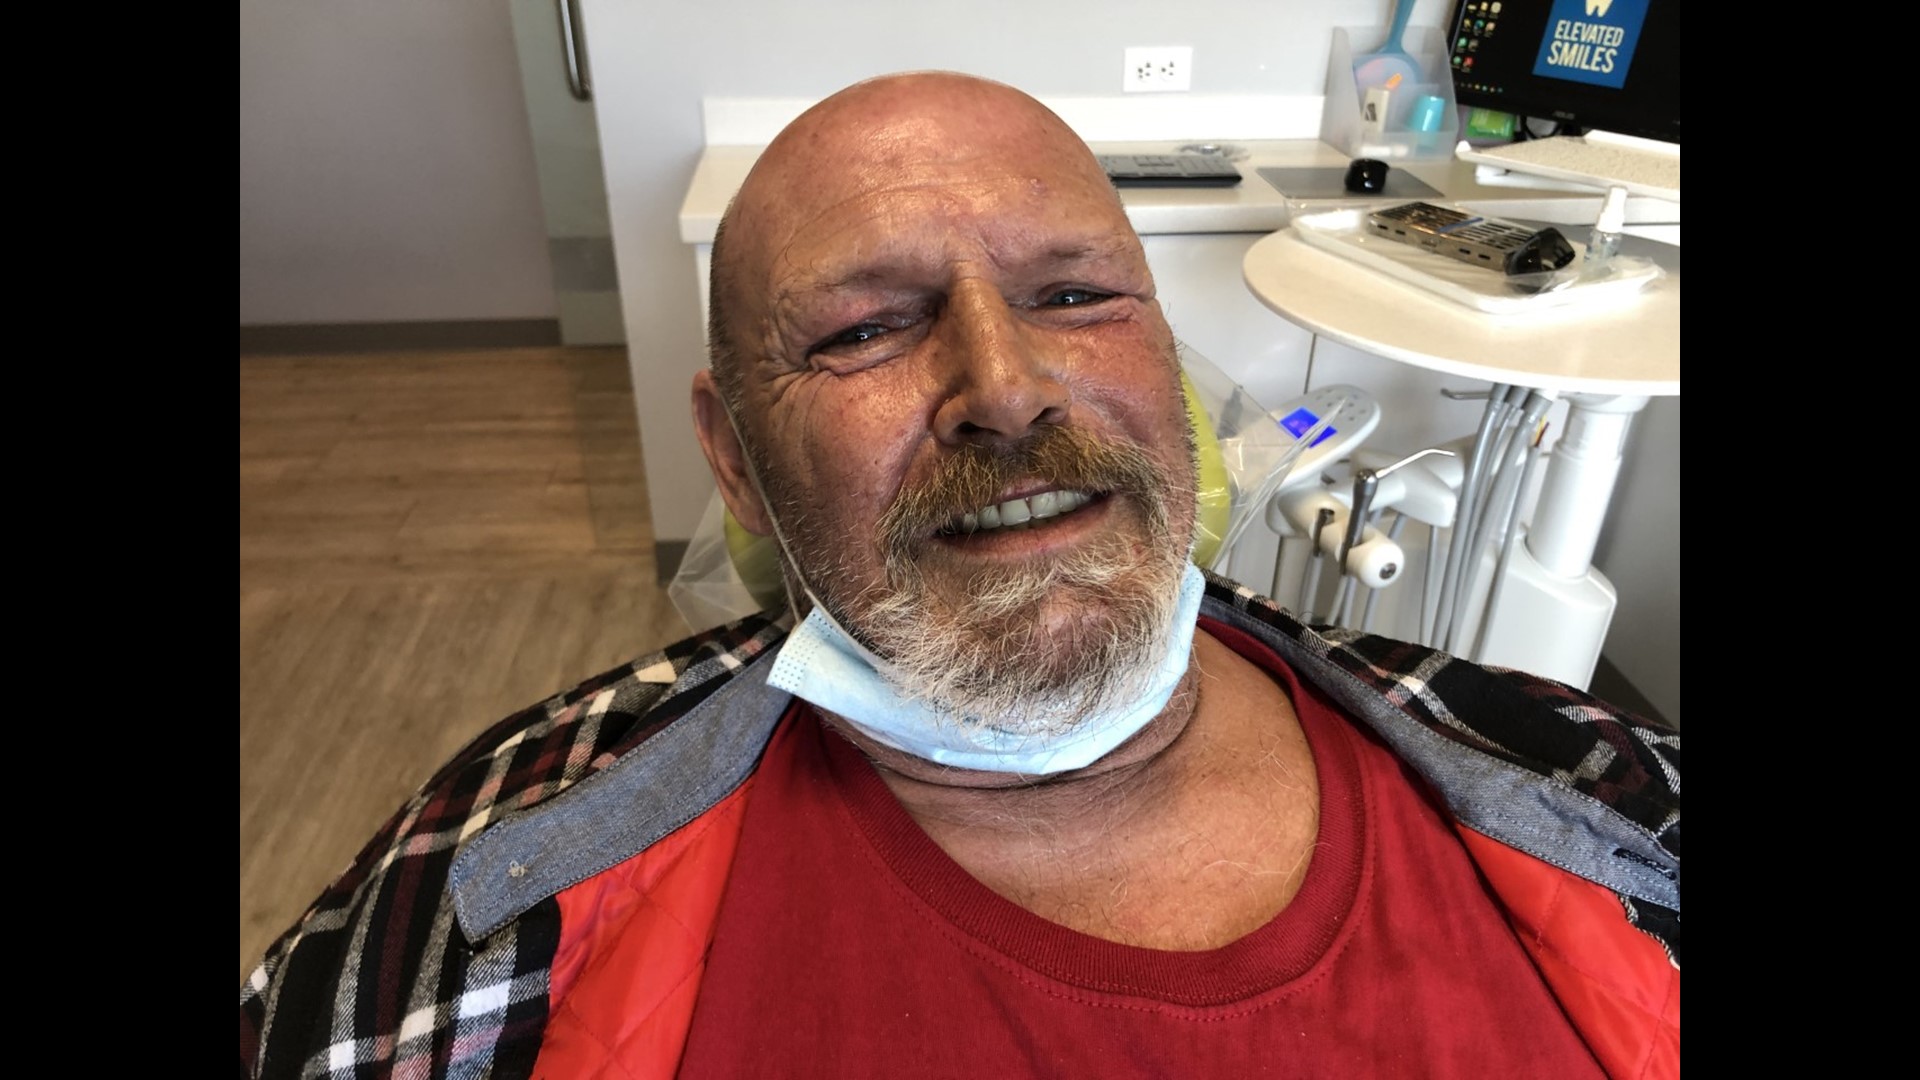 'Elevated Smiles' saw Marc living in pain with only three teeth and decided to help.